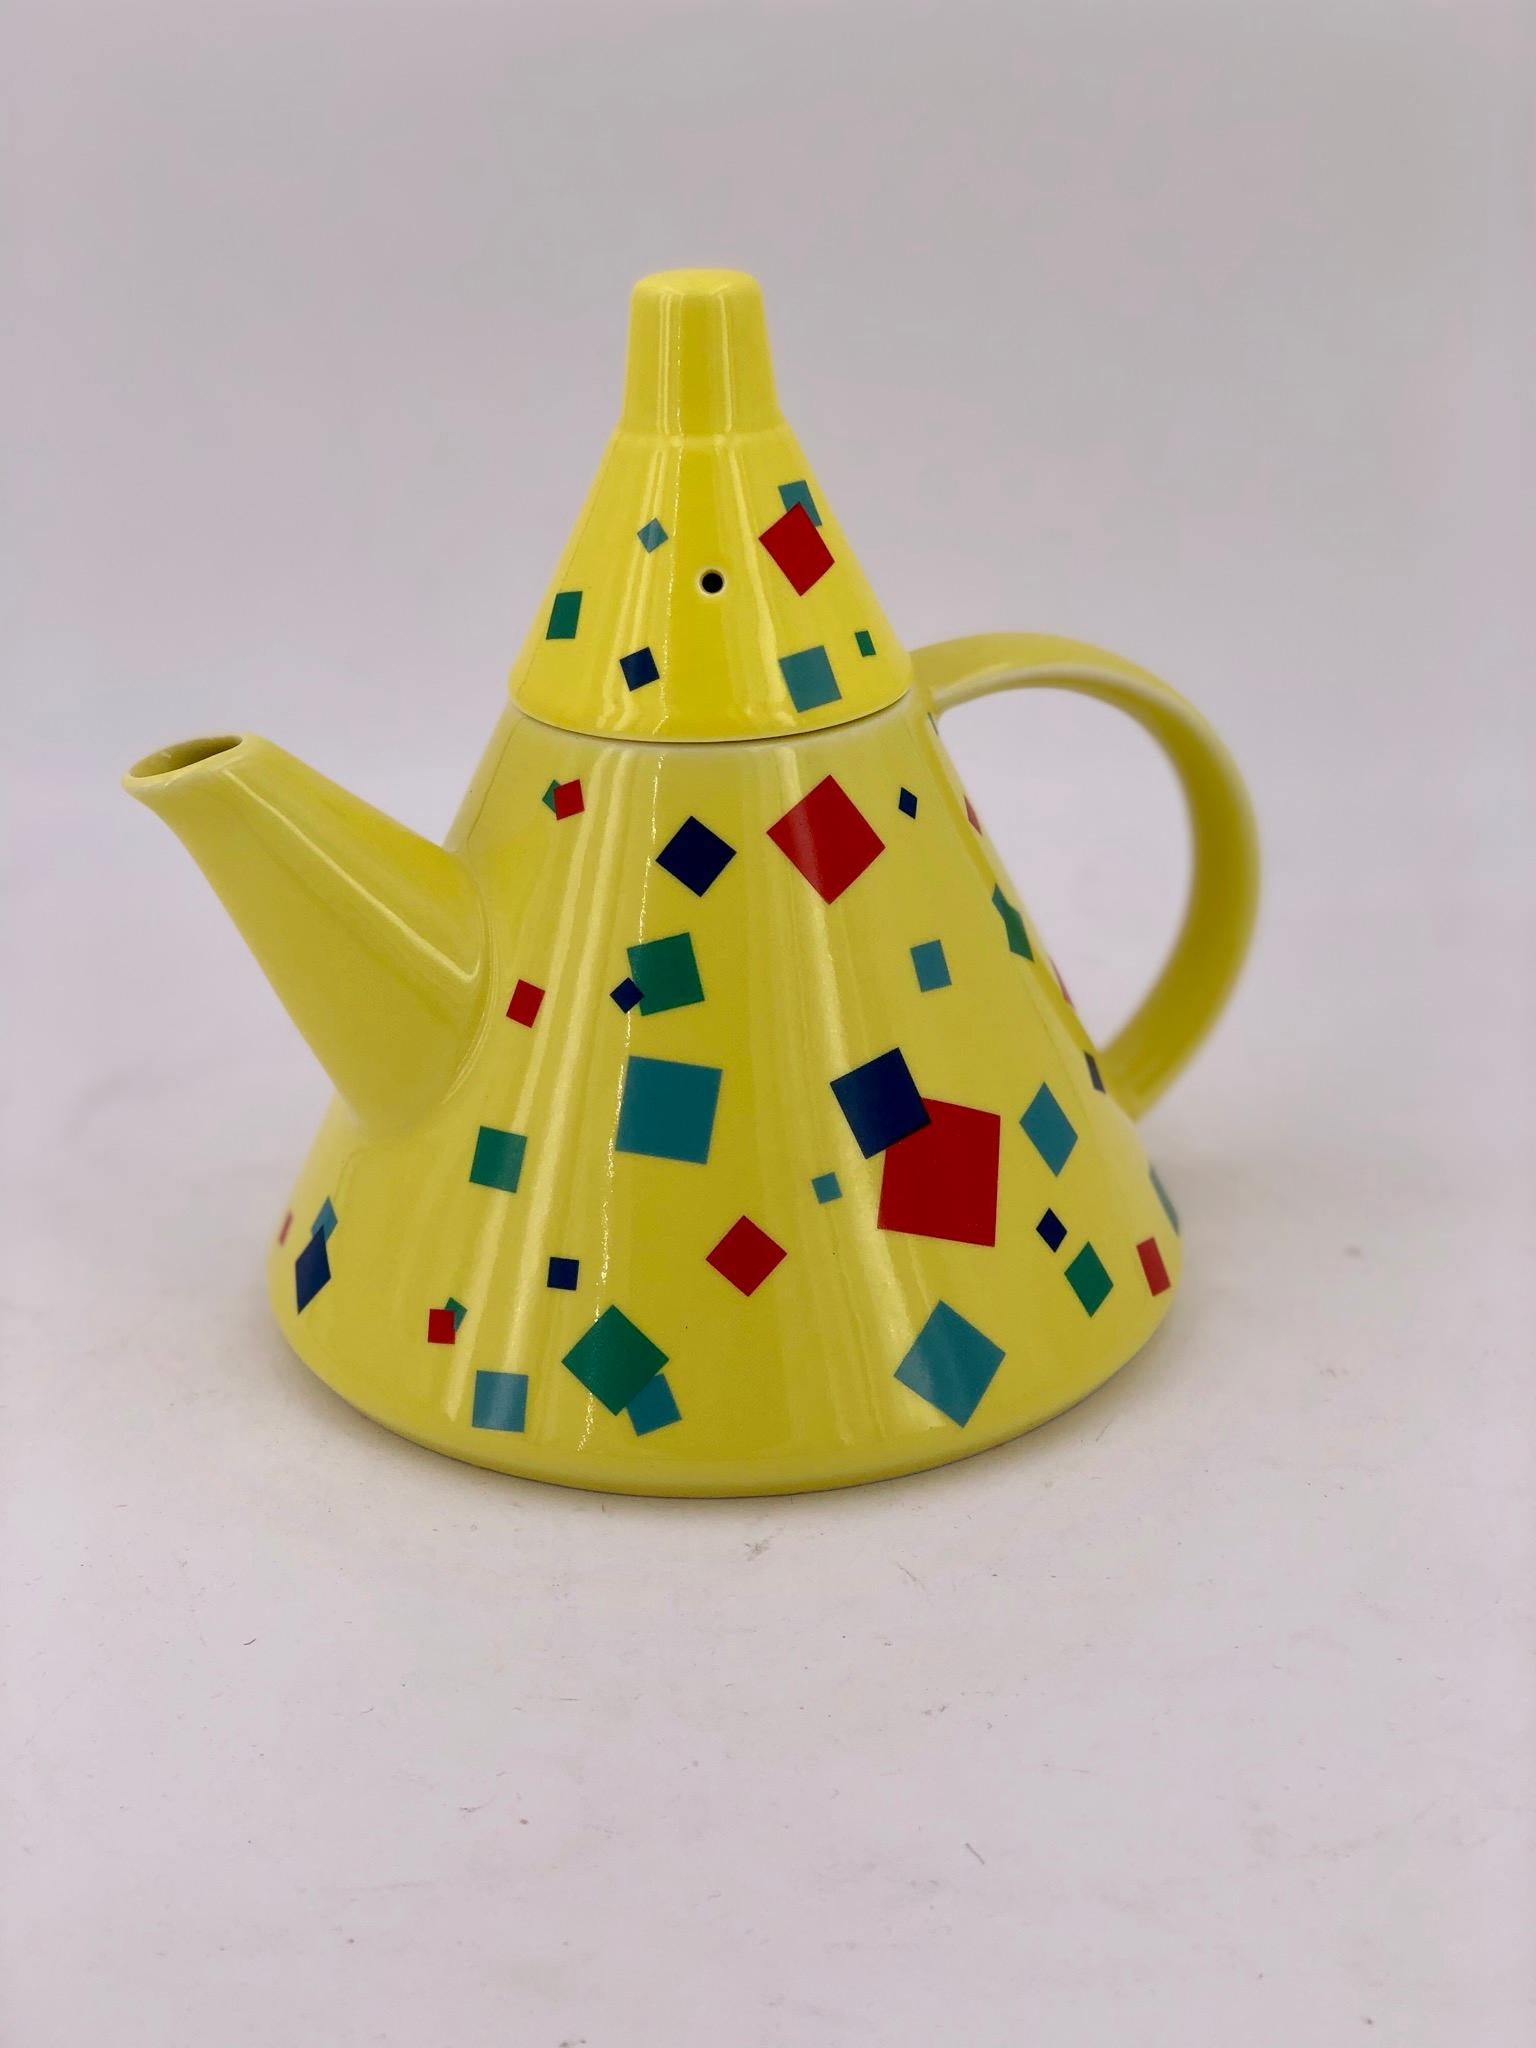 A rare and beautiful porcelain teapot designed by The Toscany Collection Japan circa 1980s, Memphis style design in excellent condition never used.